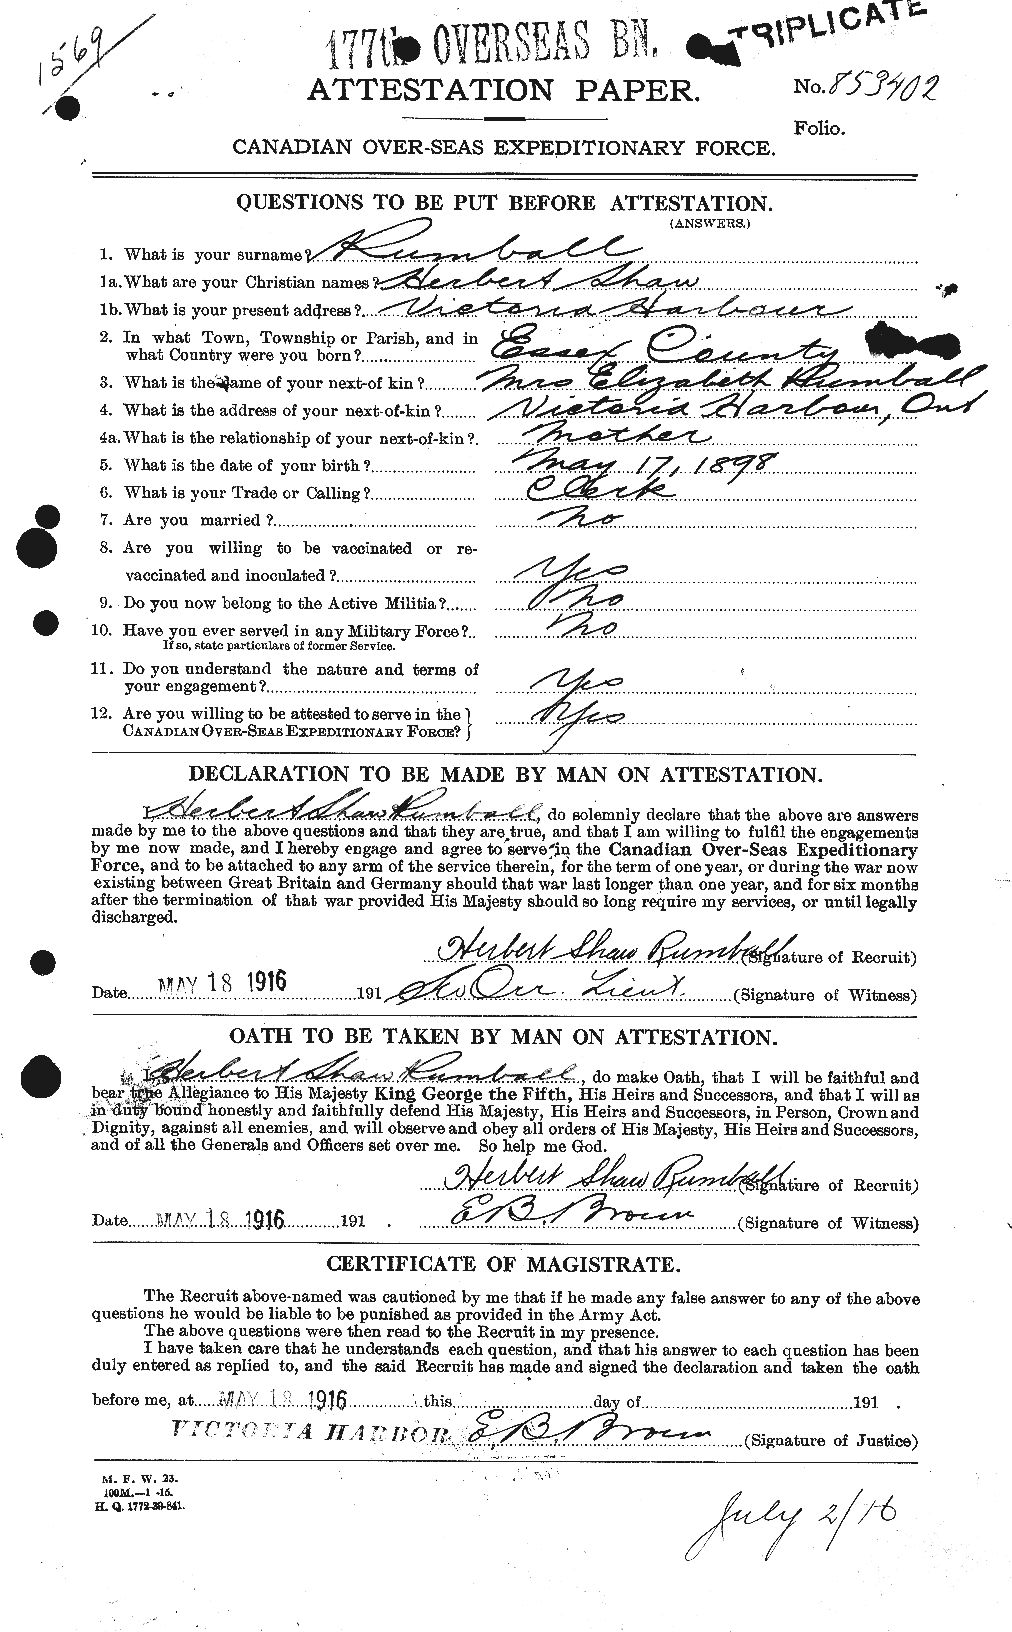 Personnel Records of the First World War - CEF 617356a